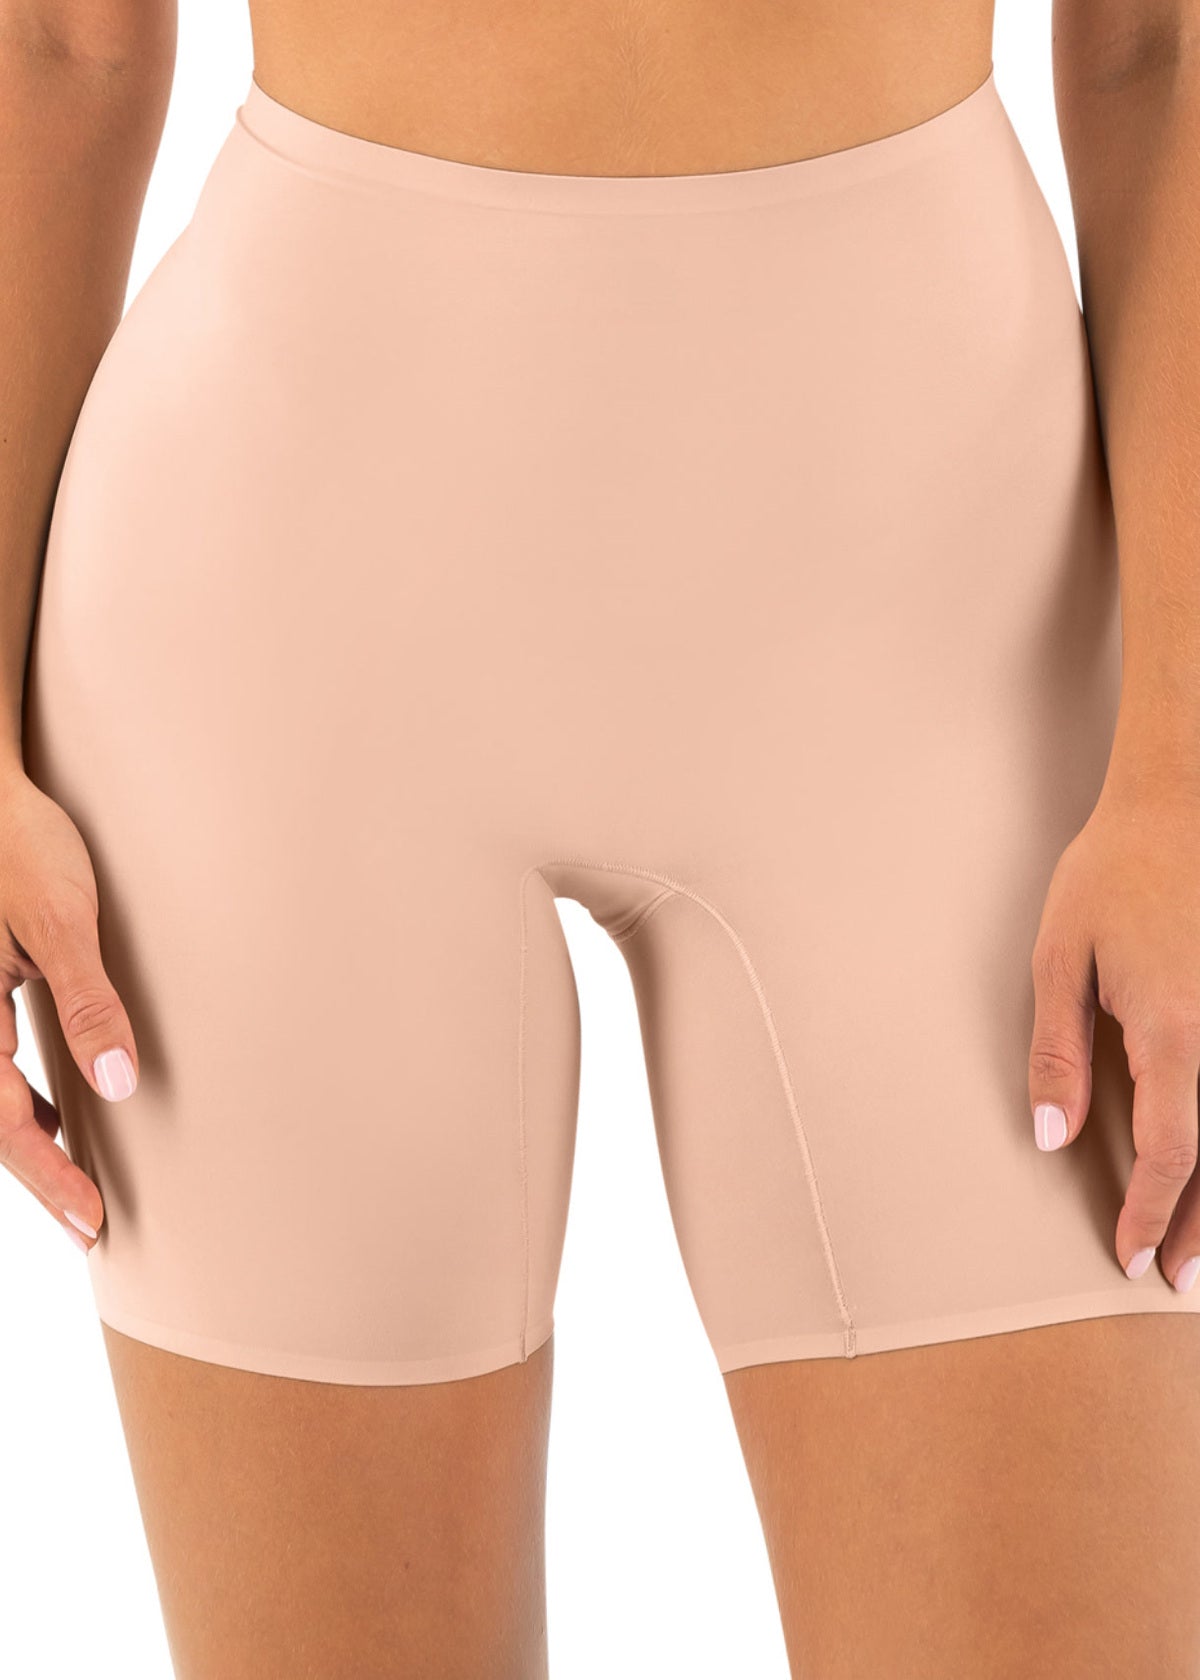 Fantasie Smoothease Invisible Stretch Shorts - Nude